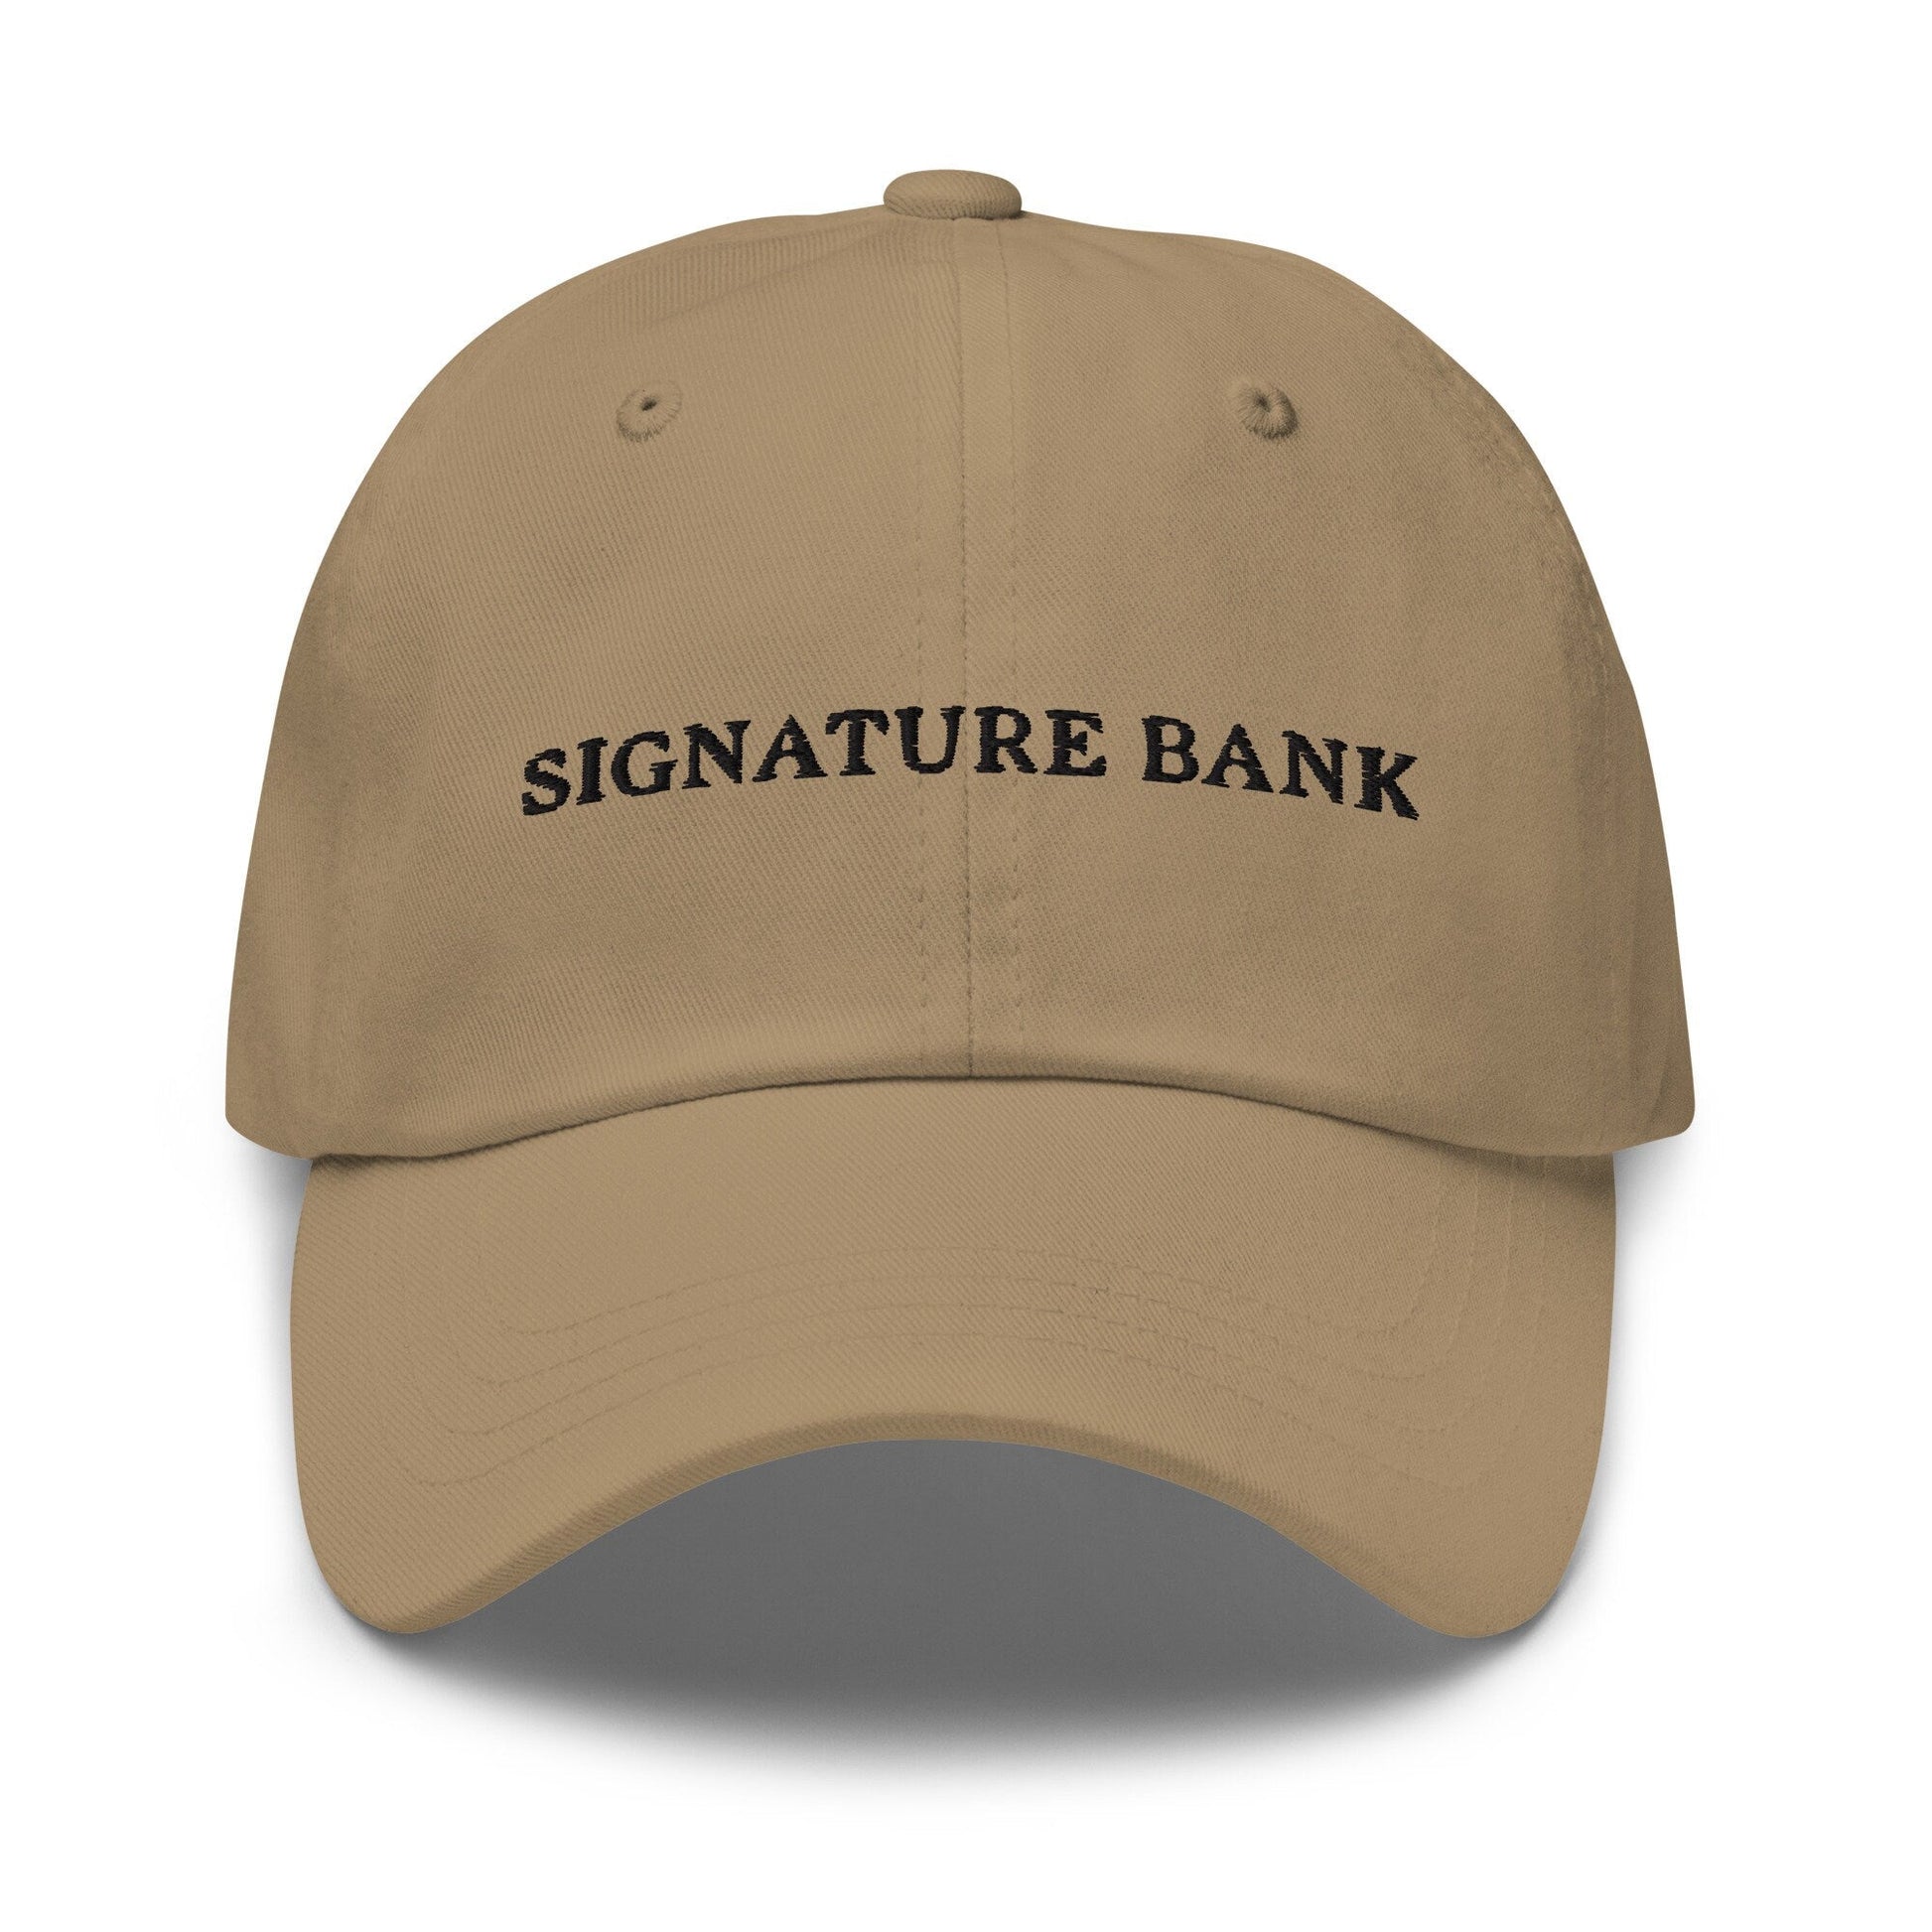 Signature Dad hat - Gift for Finance Bros & Bankers - Cotton Embroidered Cap - Evilwater Originals